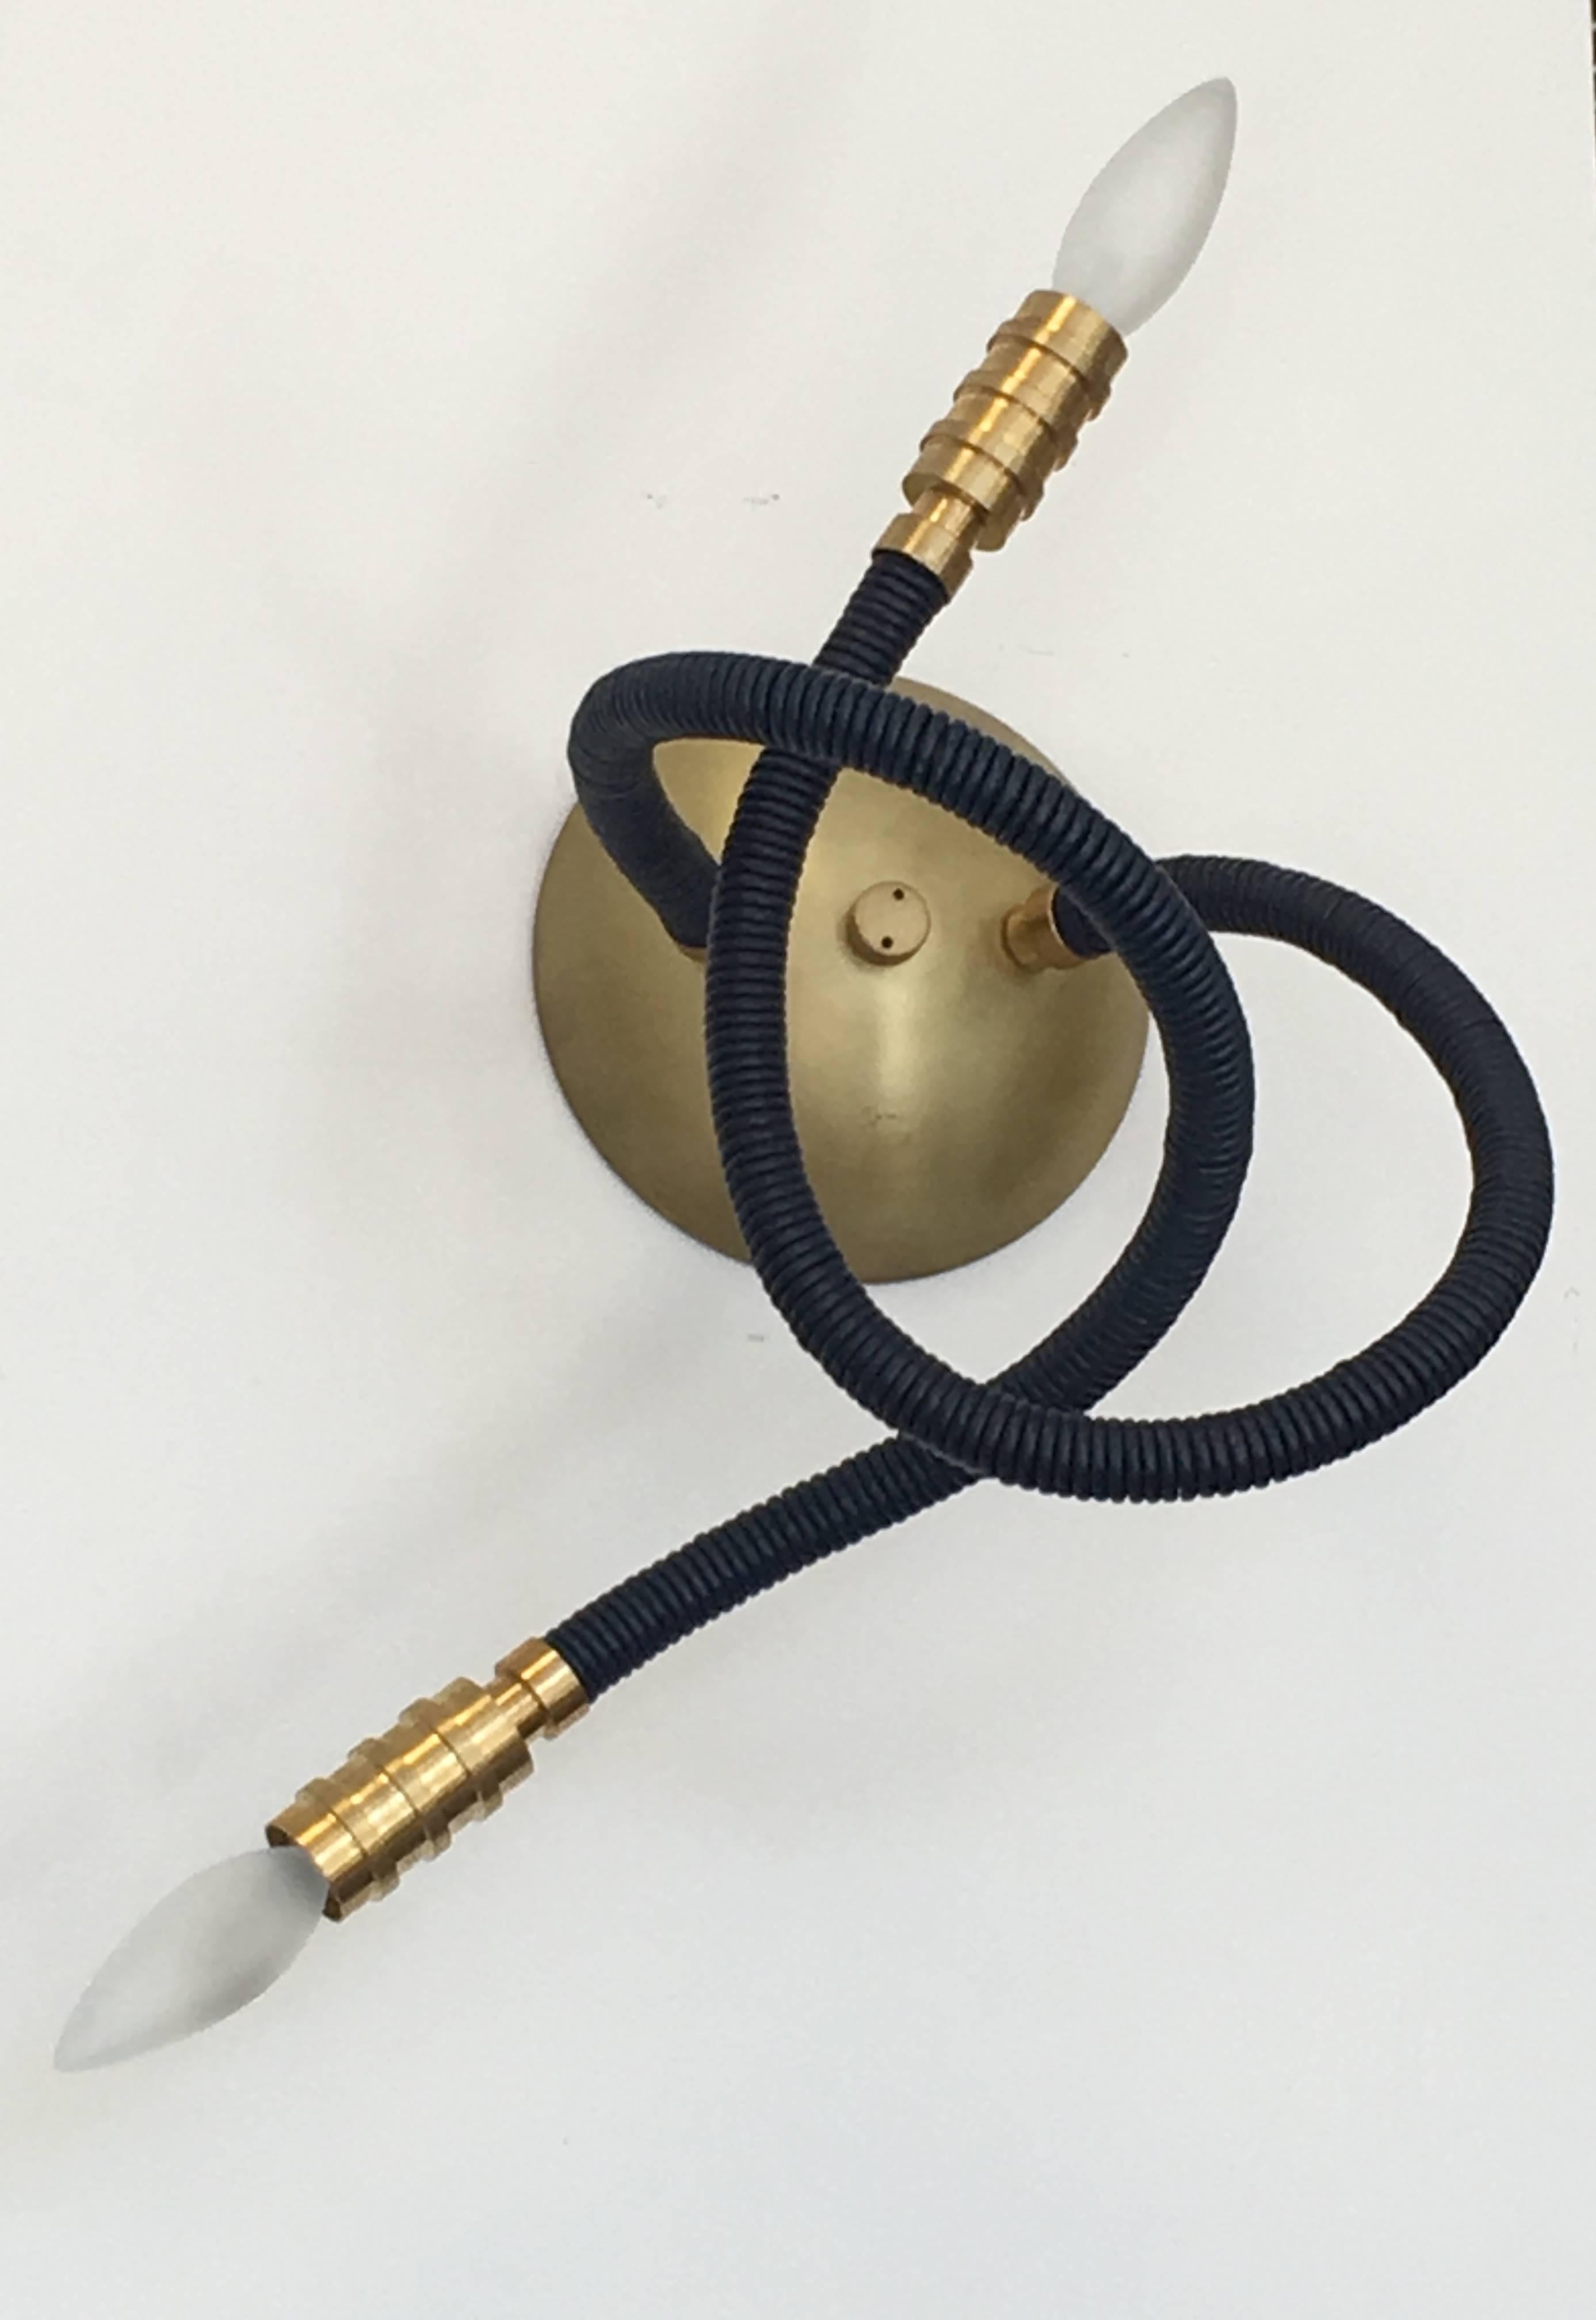 Leather wrapped two-arm sconce with tumbled brass fittings, the flexible arms allow you to adjust and design. Leather and metal options. Measurements are as shown in picture.
Avantgarden Ltd. cultivates unexpected and exceptional lighting, furniture